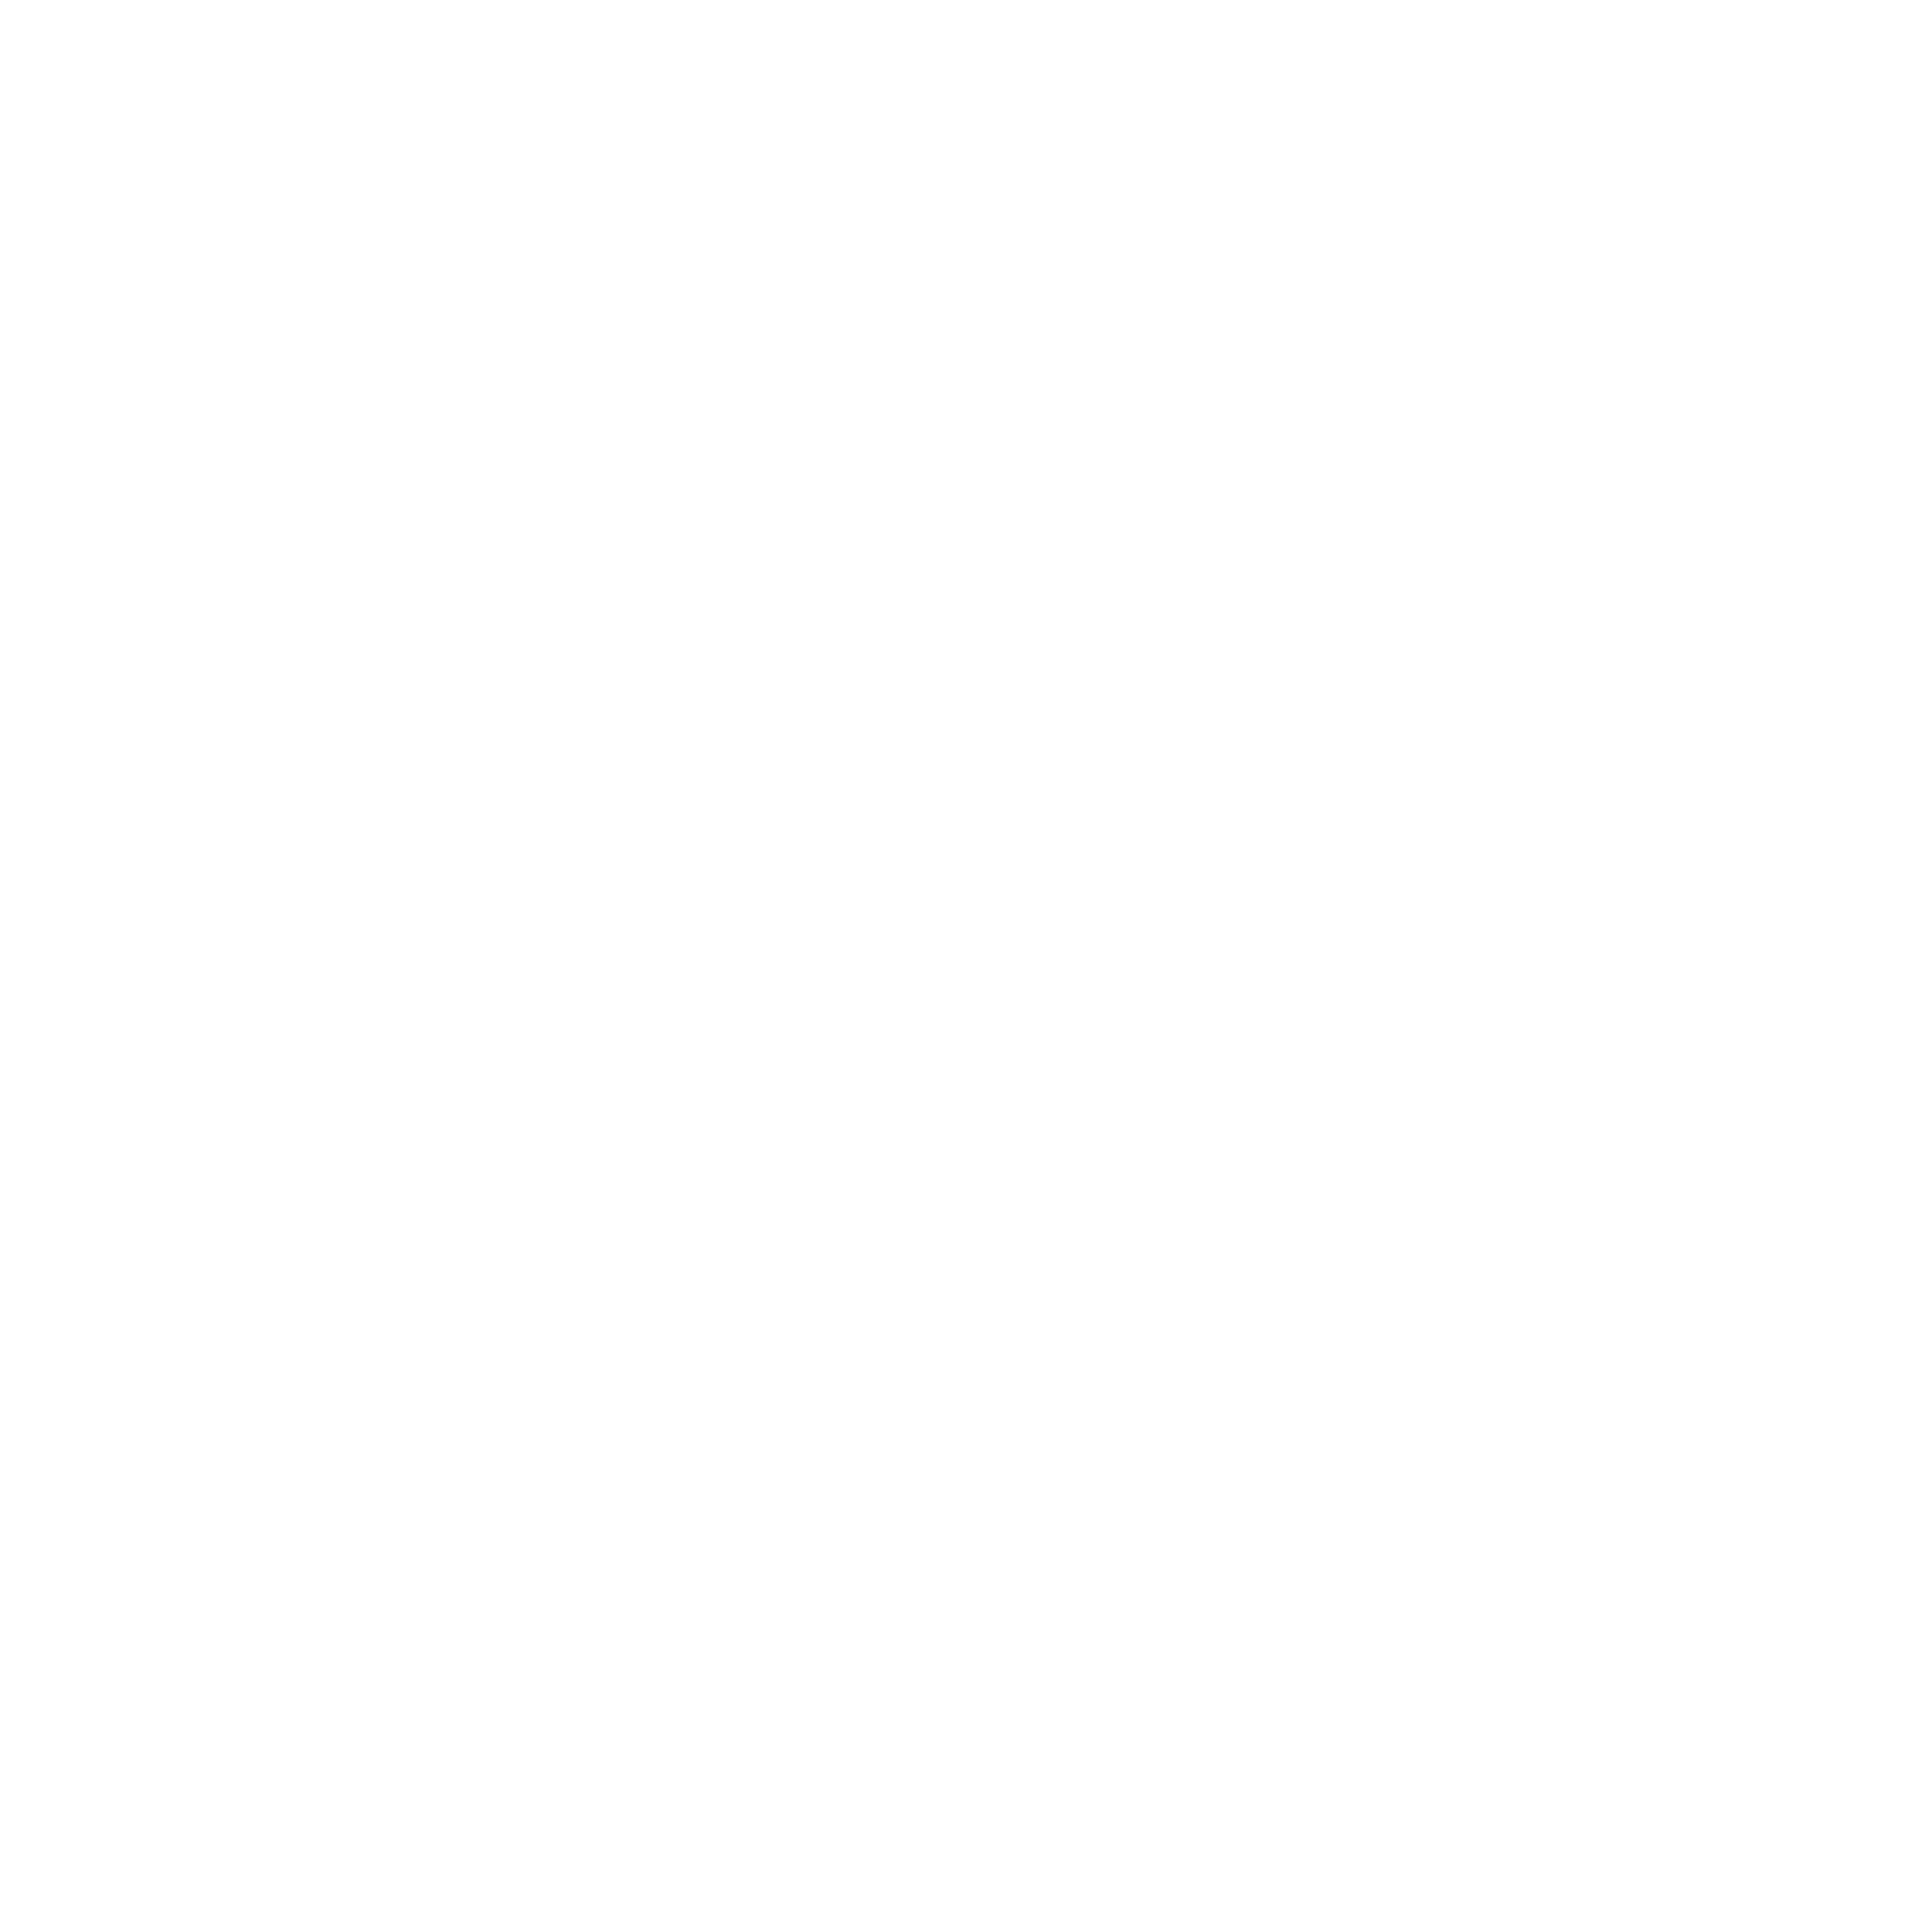 A five-pointed star to the left of the text "Macy's"